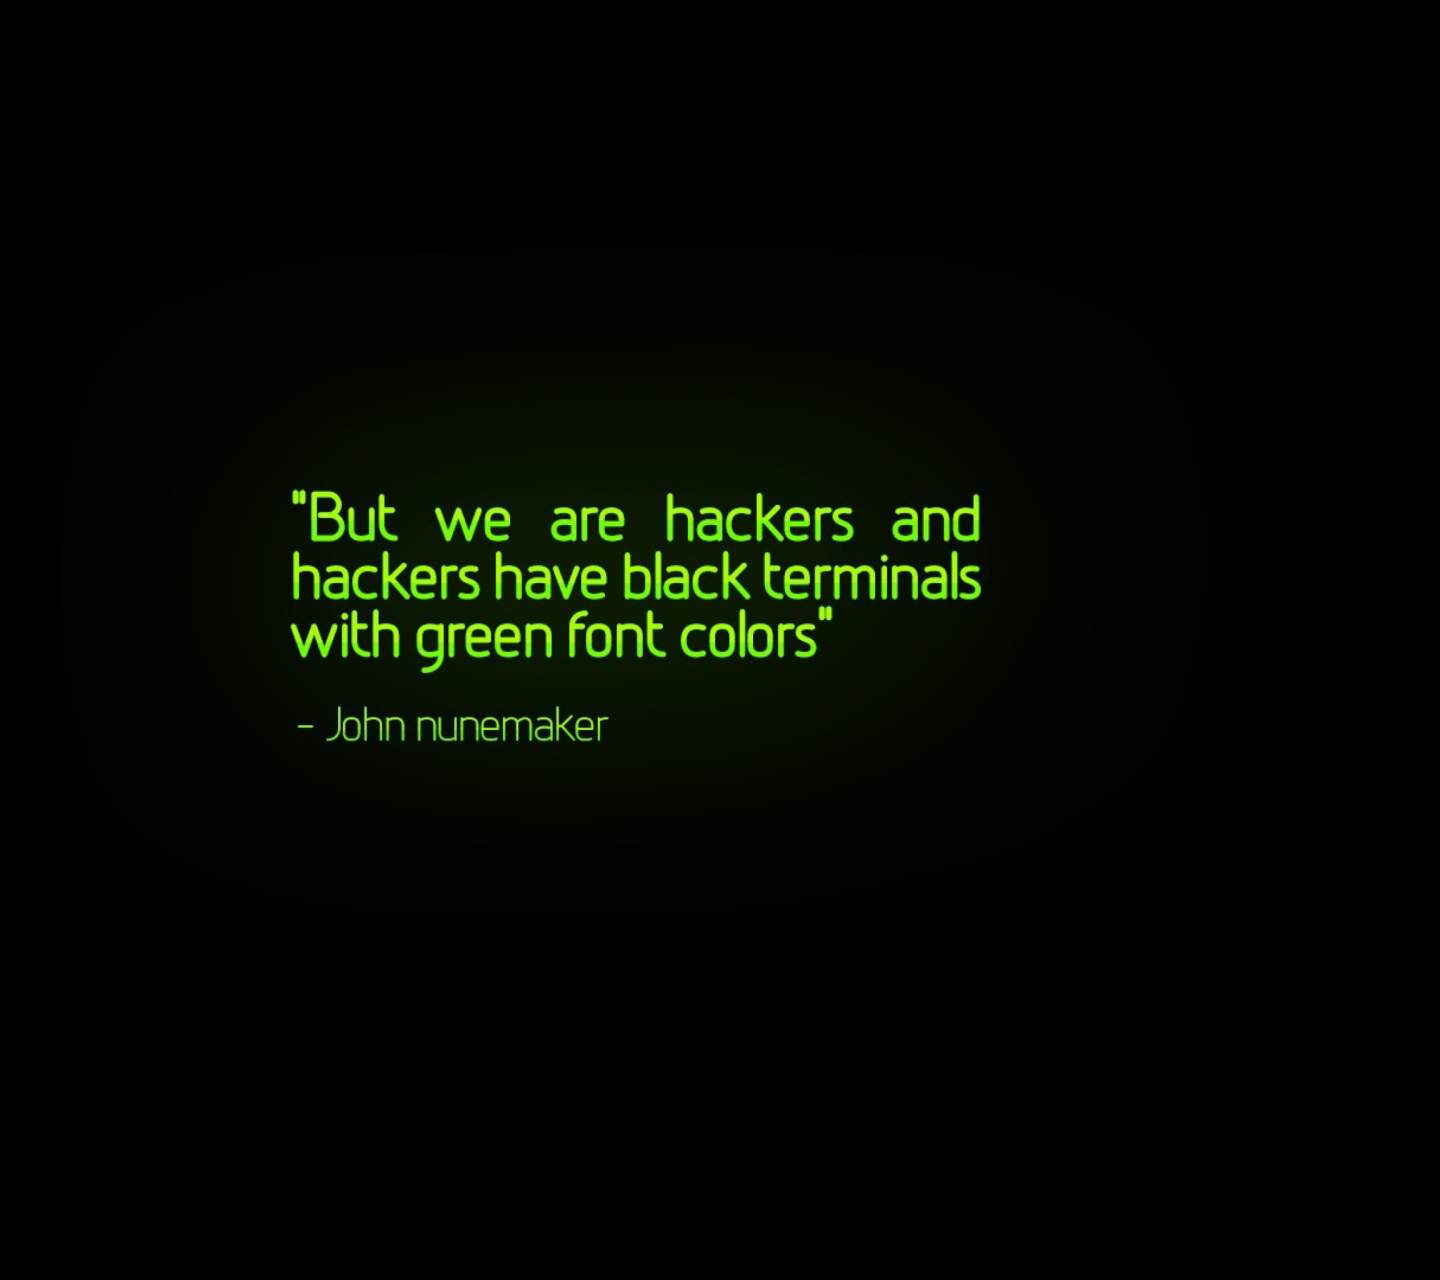 But We Are Hackers screenshot #1 1440x1280